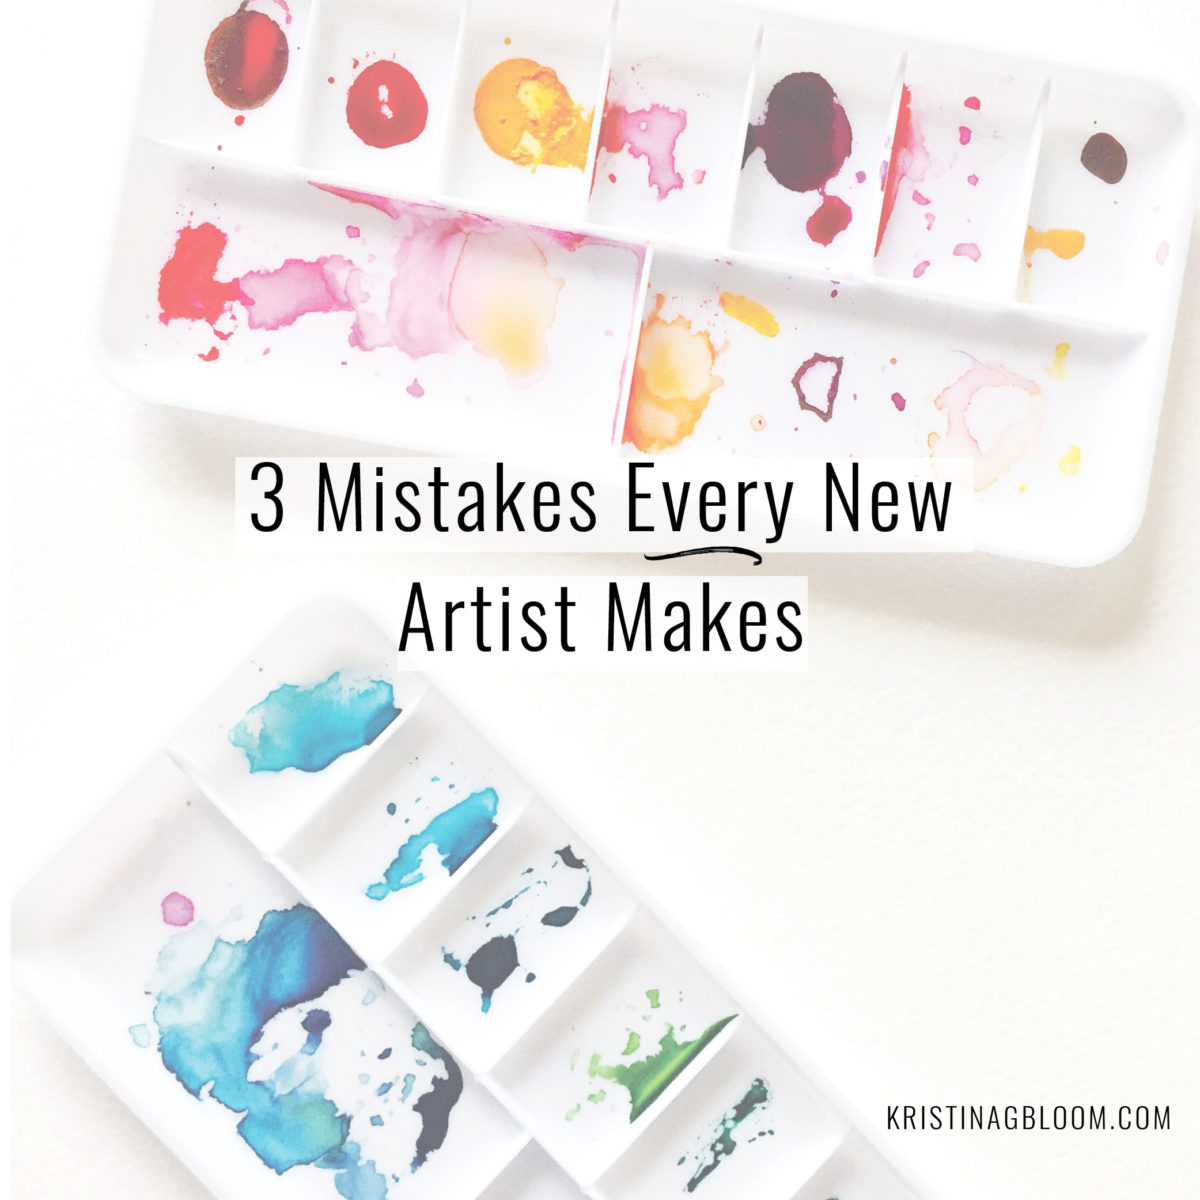 3 Mistakes Every New Artist Makes